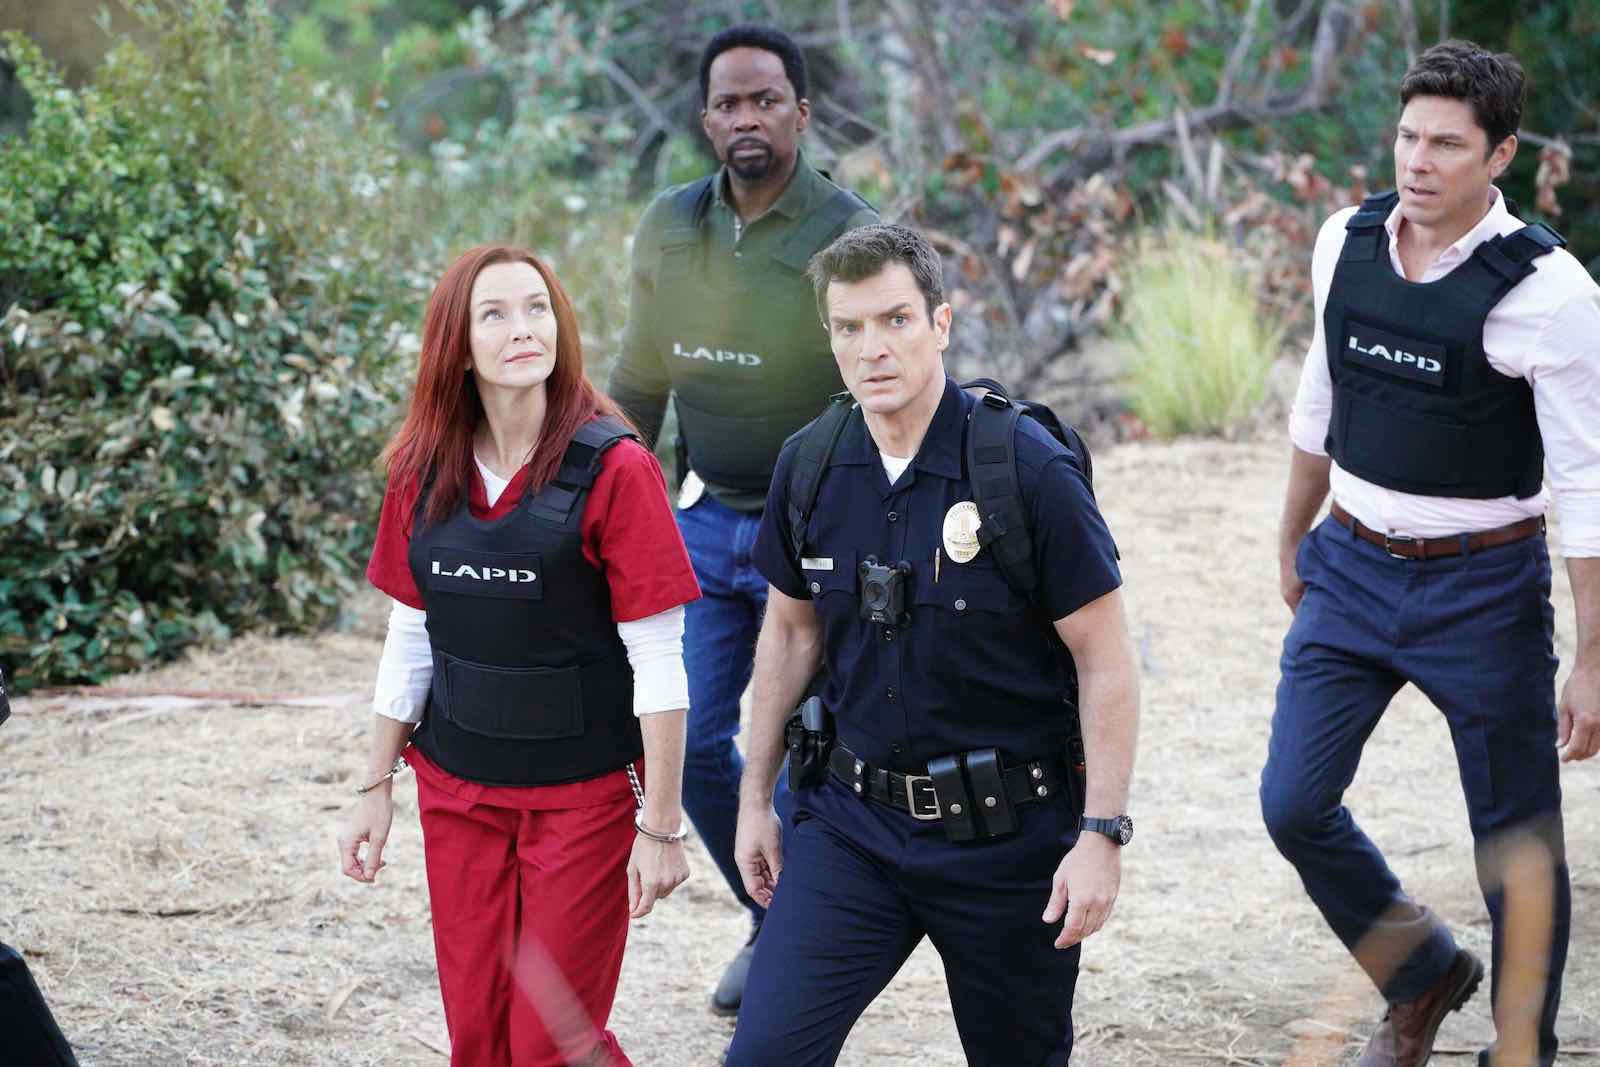 Nathan Fillion in 'The Rookie' deserves more than just season 2 Film